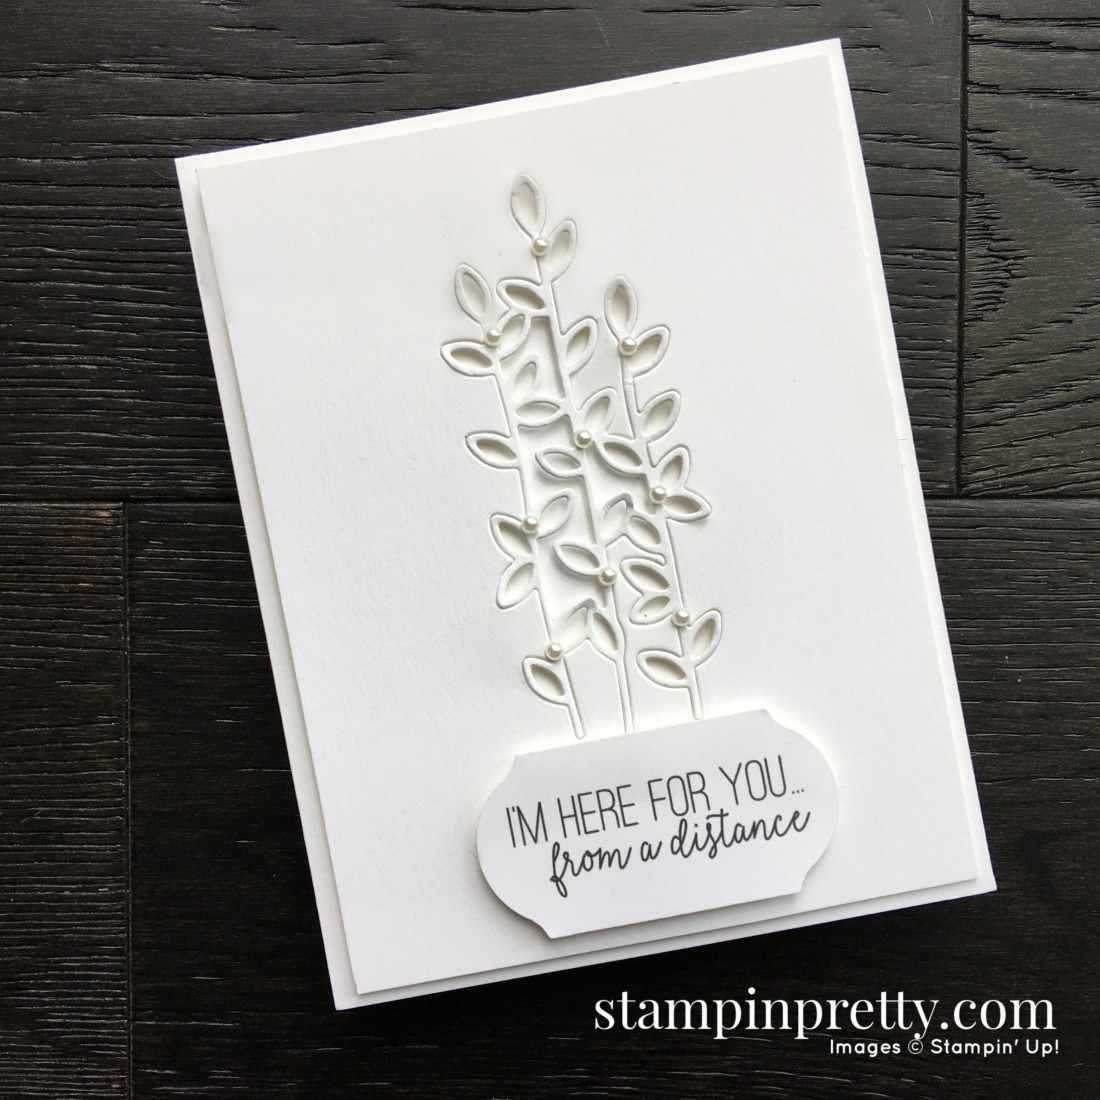 Share Sunshine PDF COVID 19 Relief by Stampin' UP! Card created by Mary Fish, Stampin' Pretty